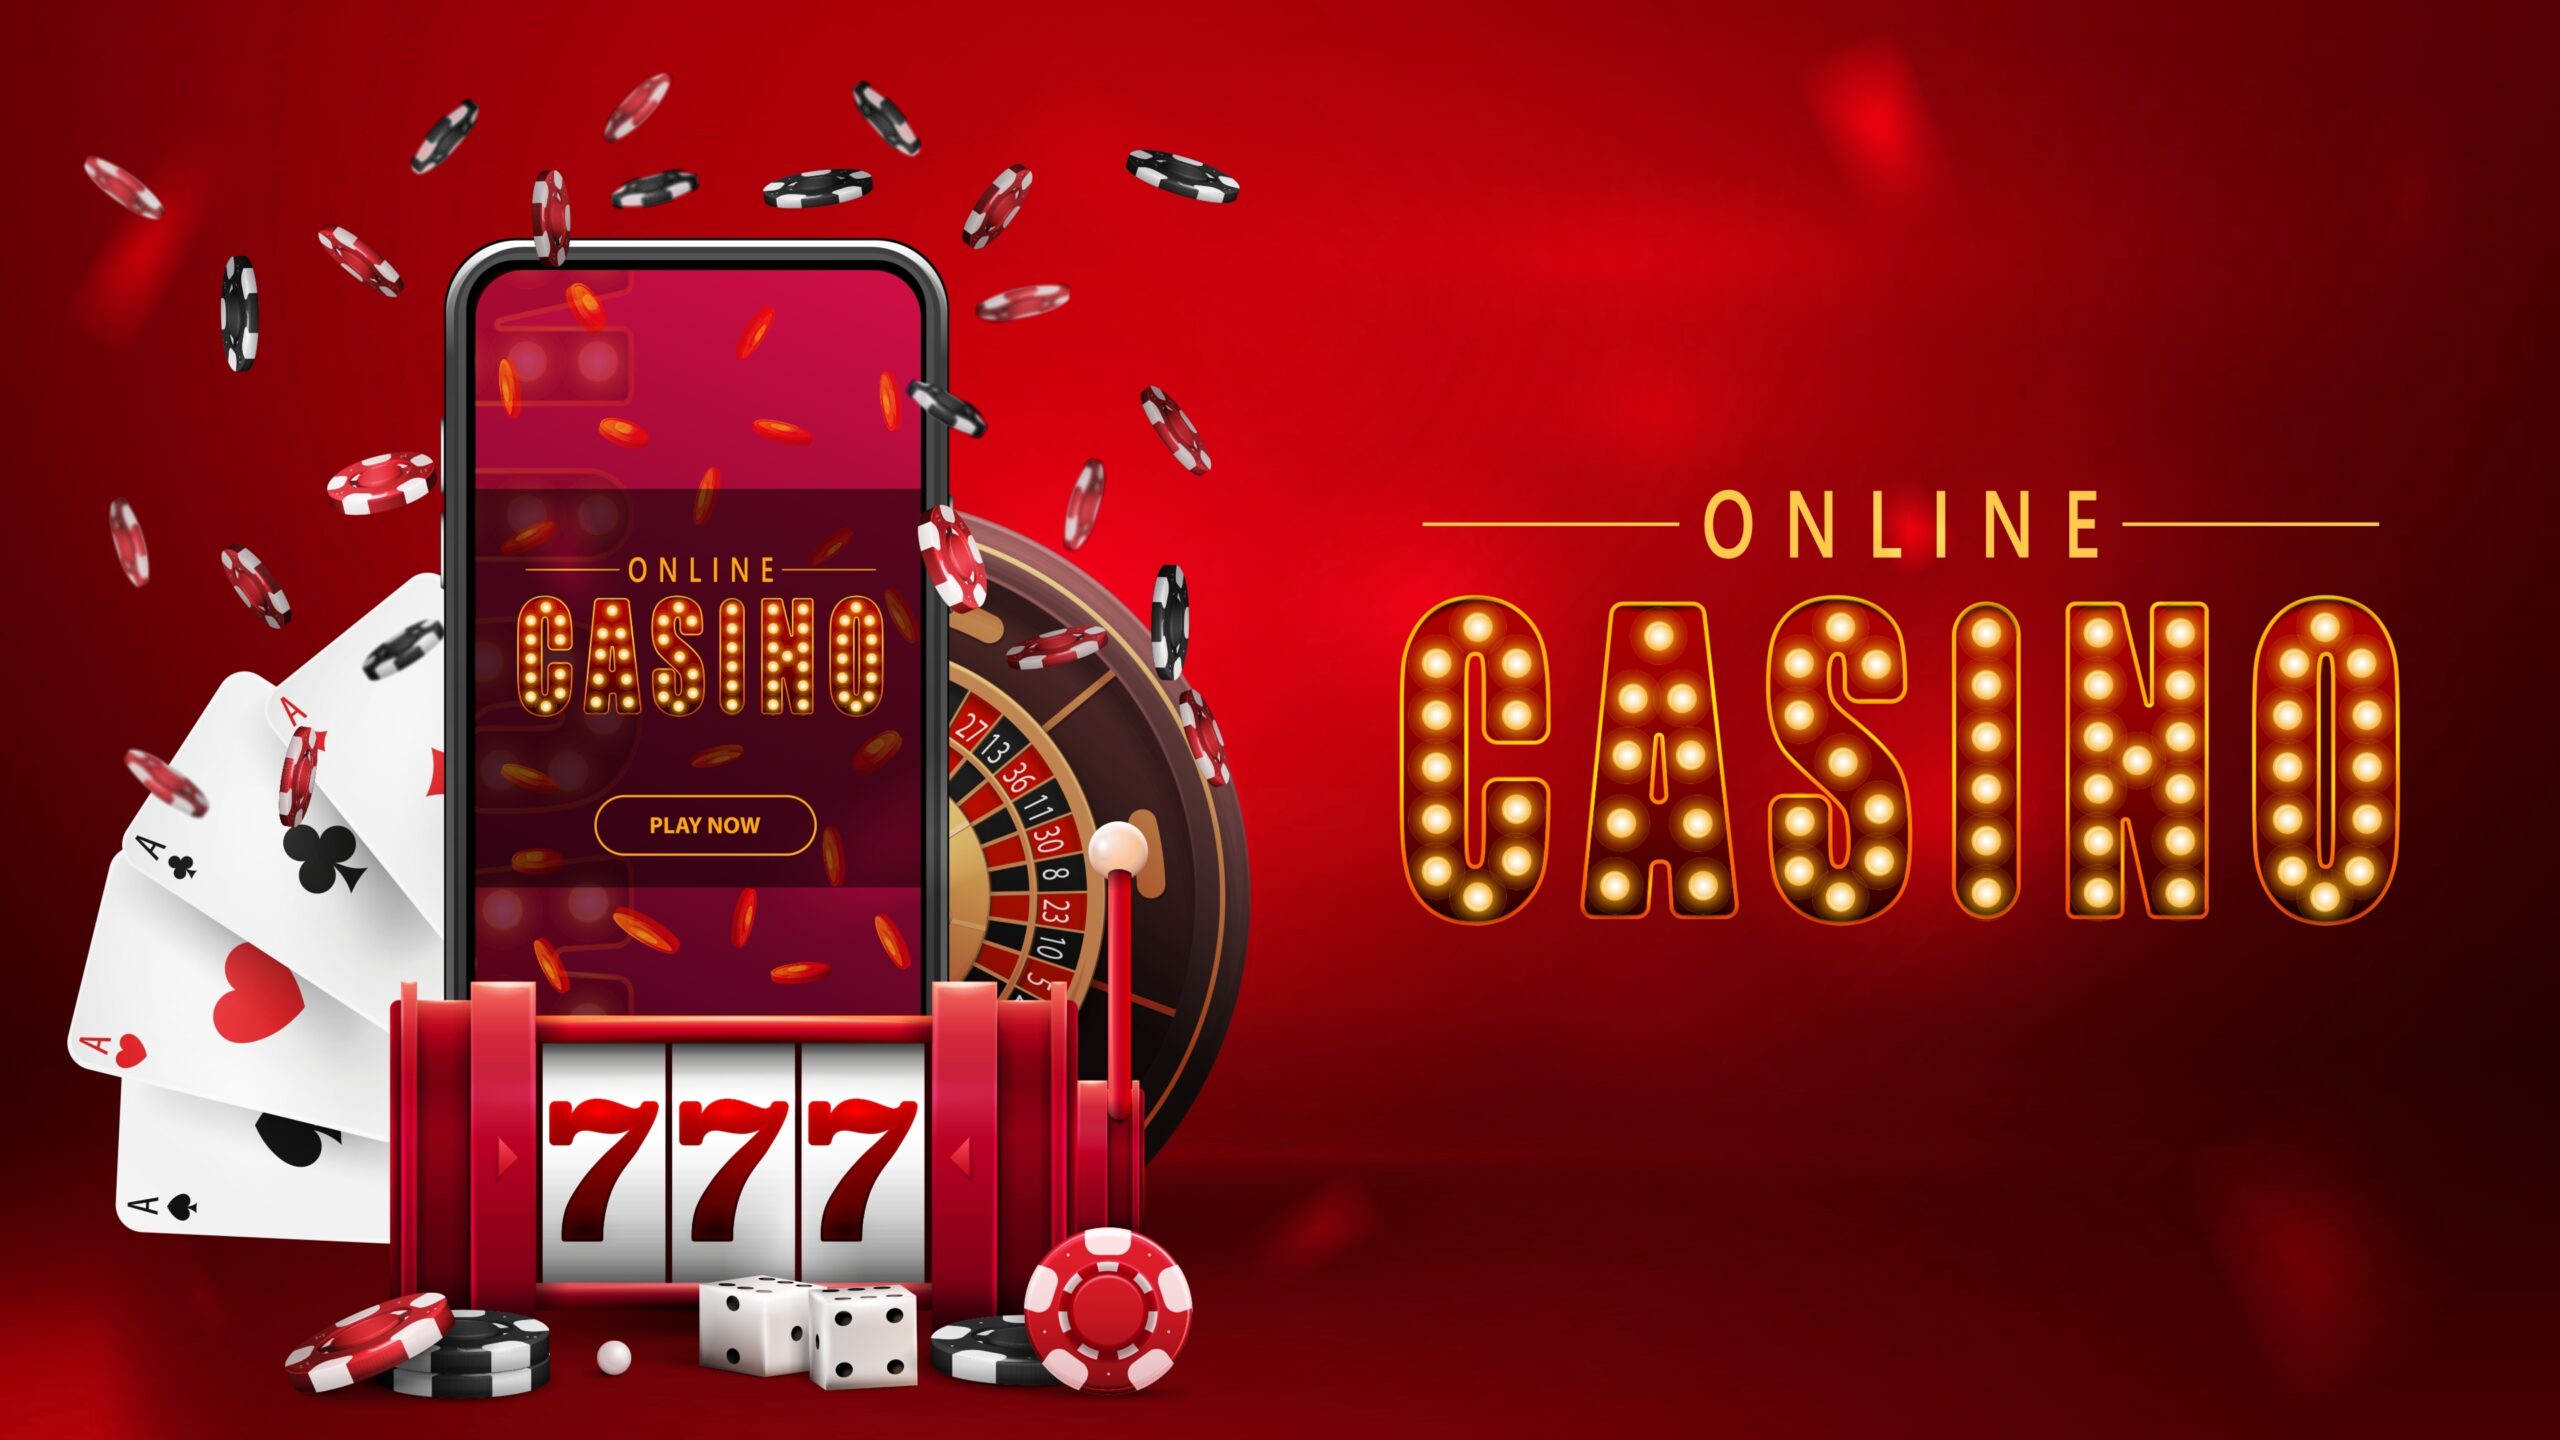 Geek insider, geekinsider, geekinsider. Com,, where things can go wrong at online casinos, gaming